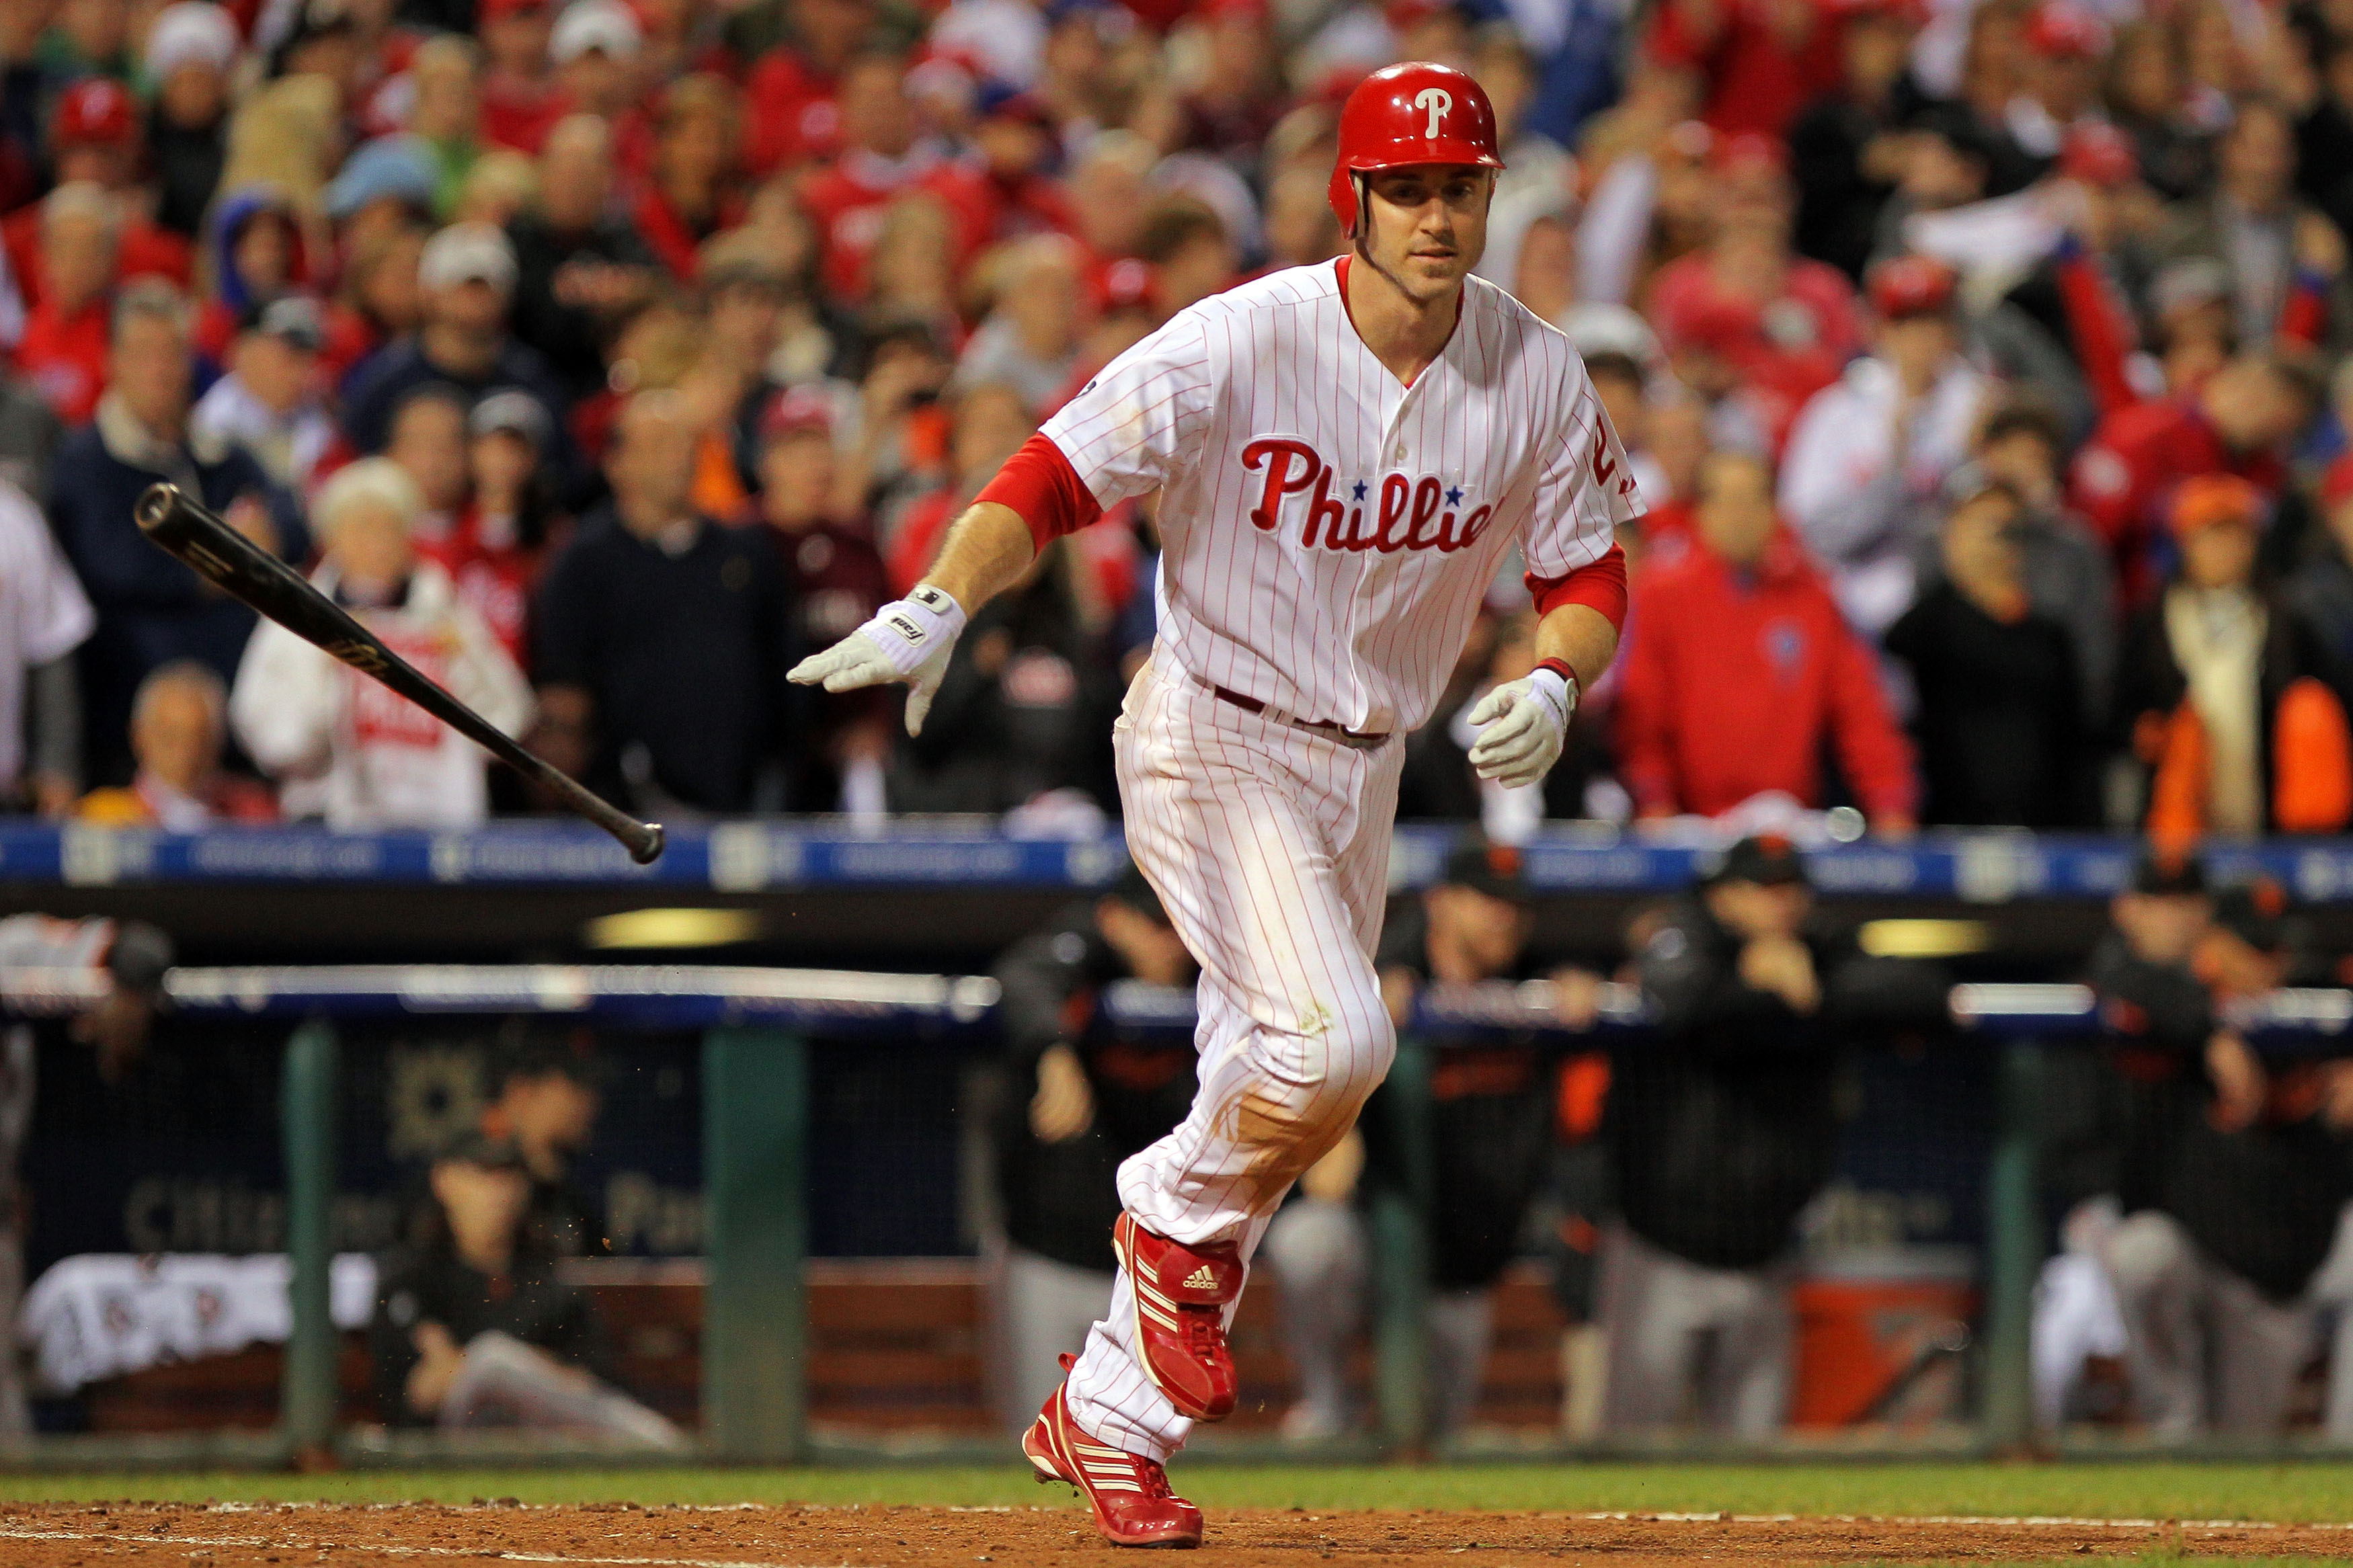 Philadelphia Phillies: Chase Utley's Knee Injury Forces Him to